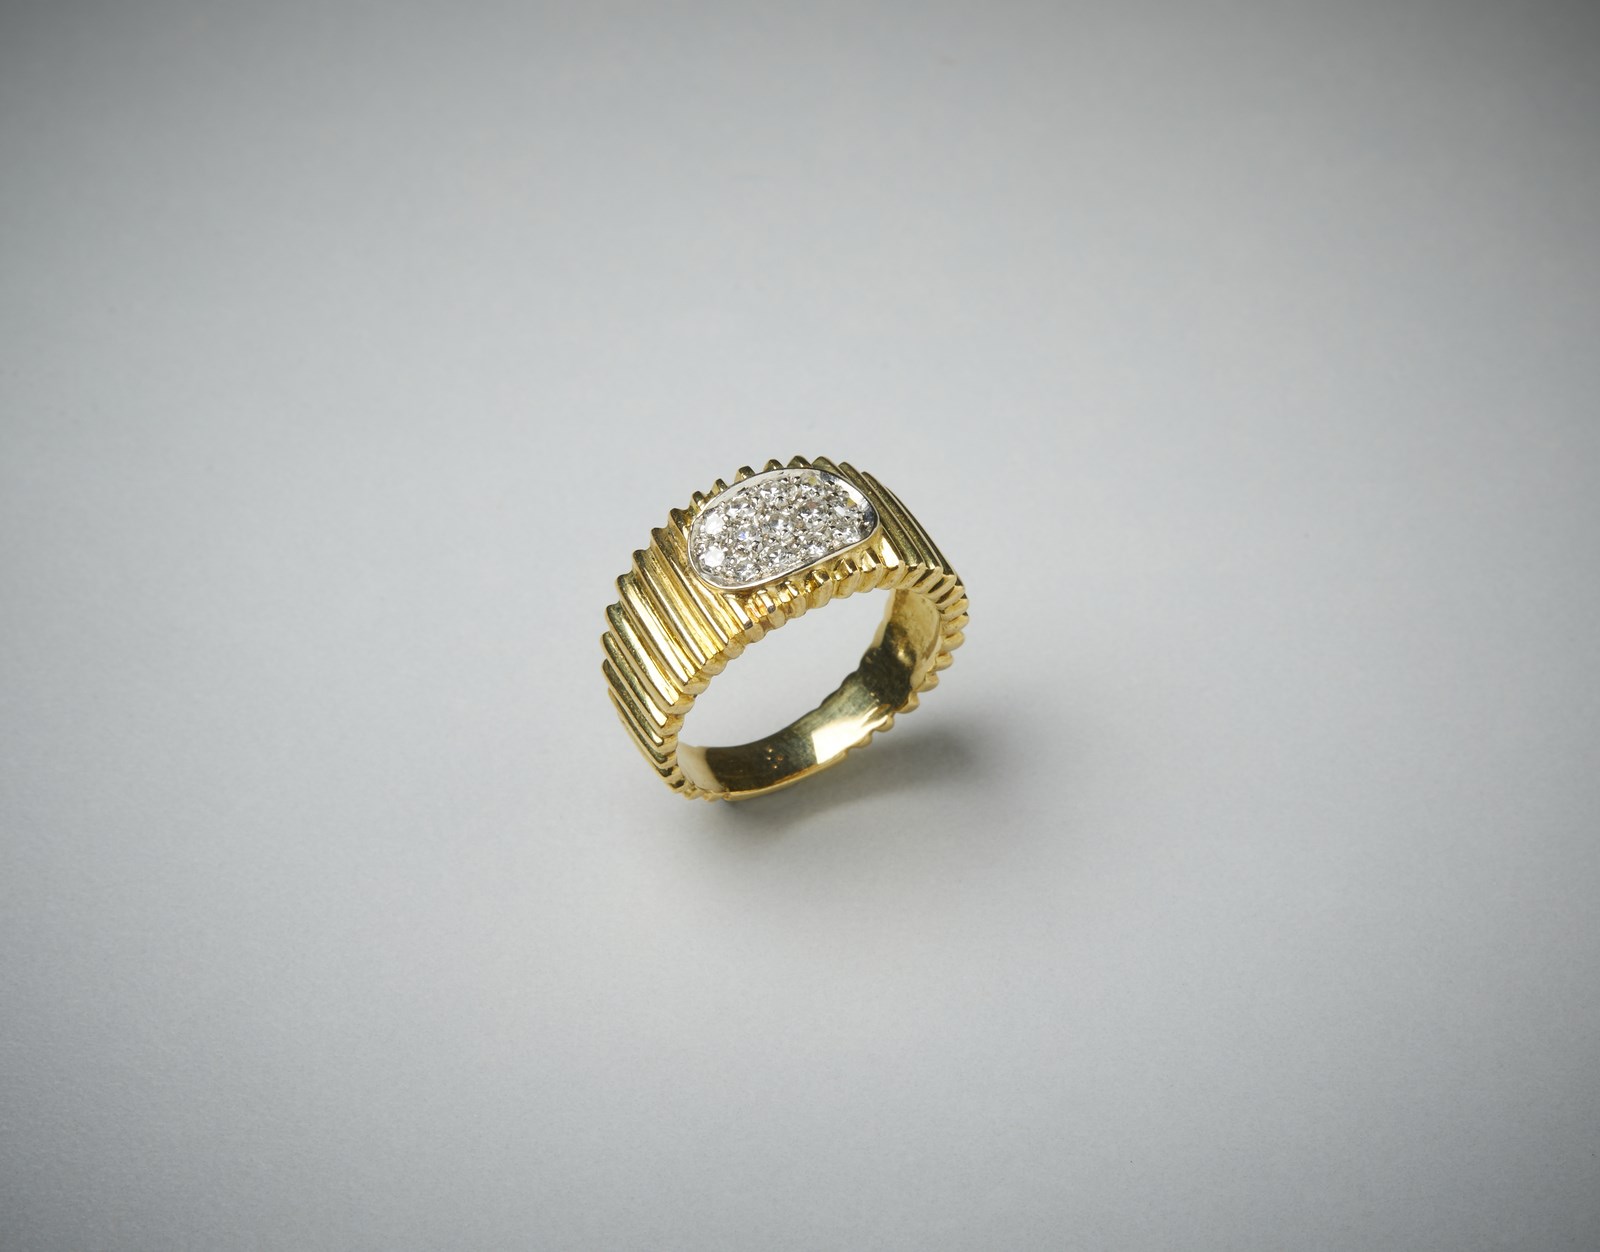 Striped band ring in yellow gold 750 with huit huit-cut white diamond pavé, total carat: about 0.40 (. )